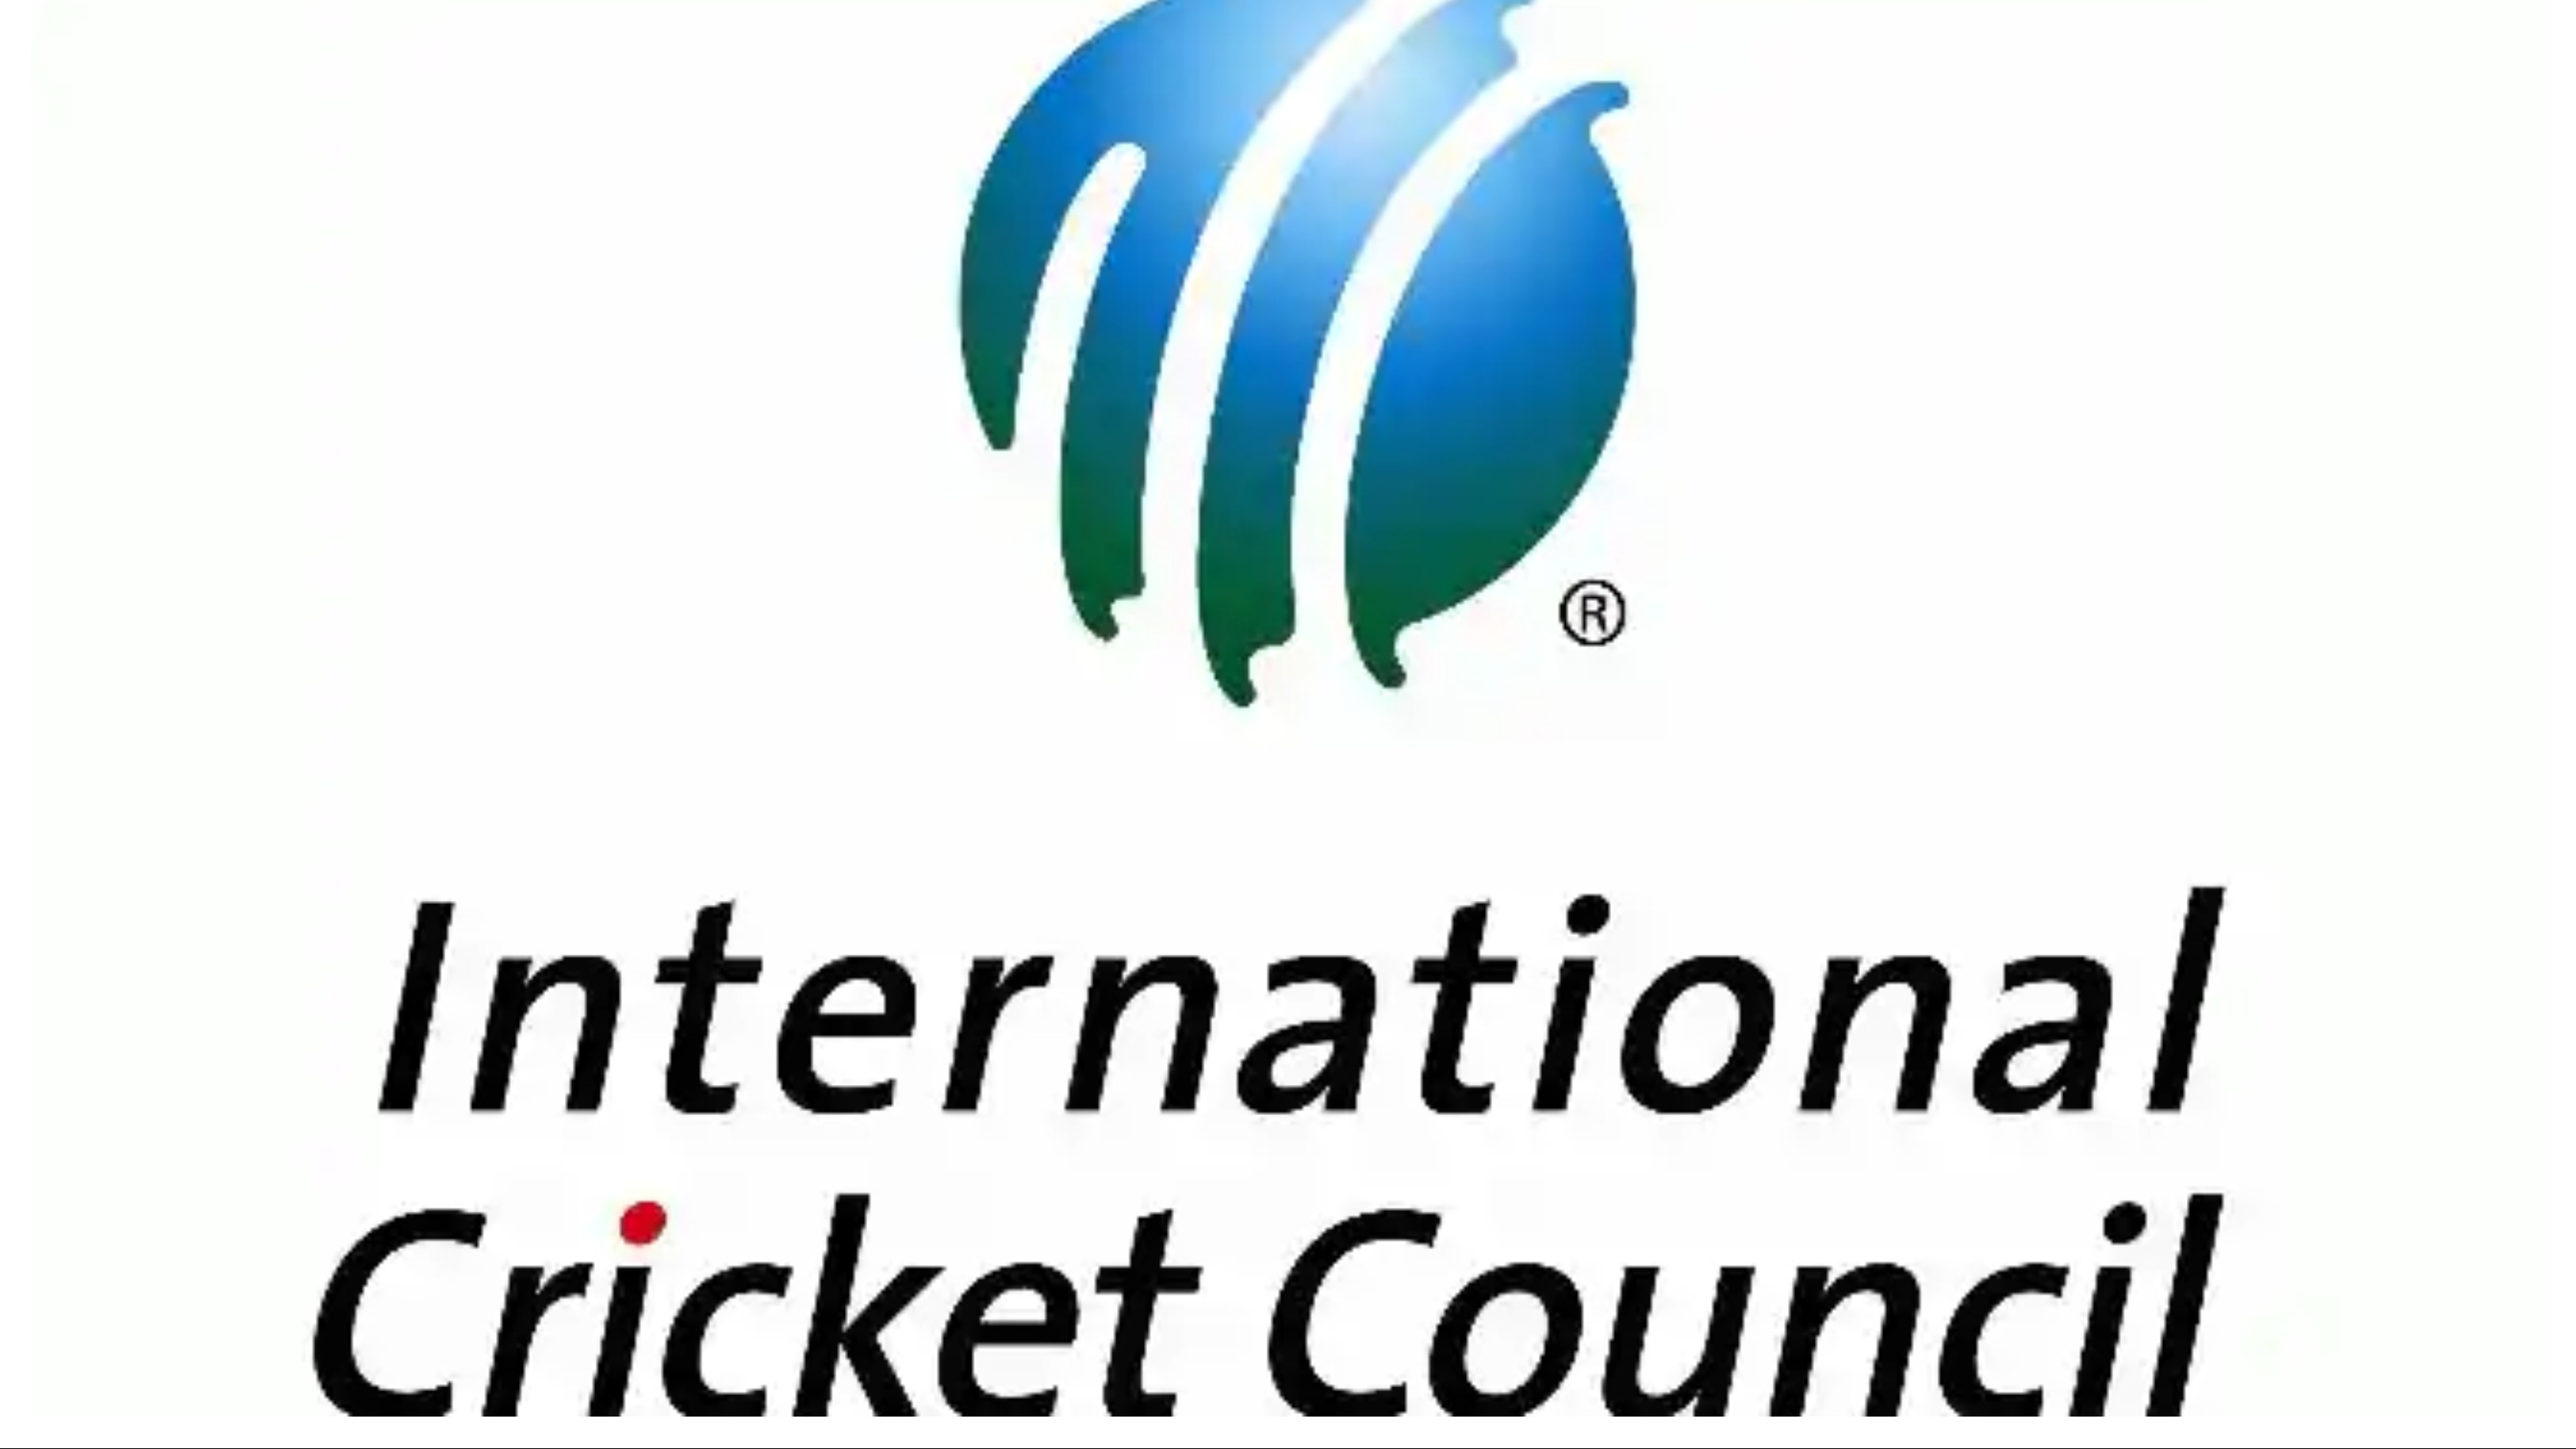 ICC comes up with minimum age policy for players to play international cricket